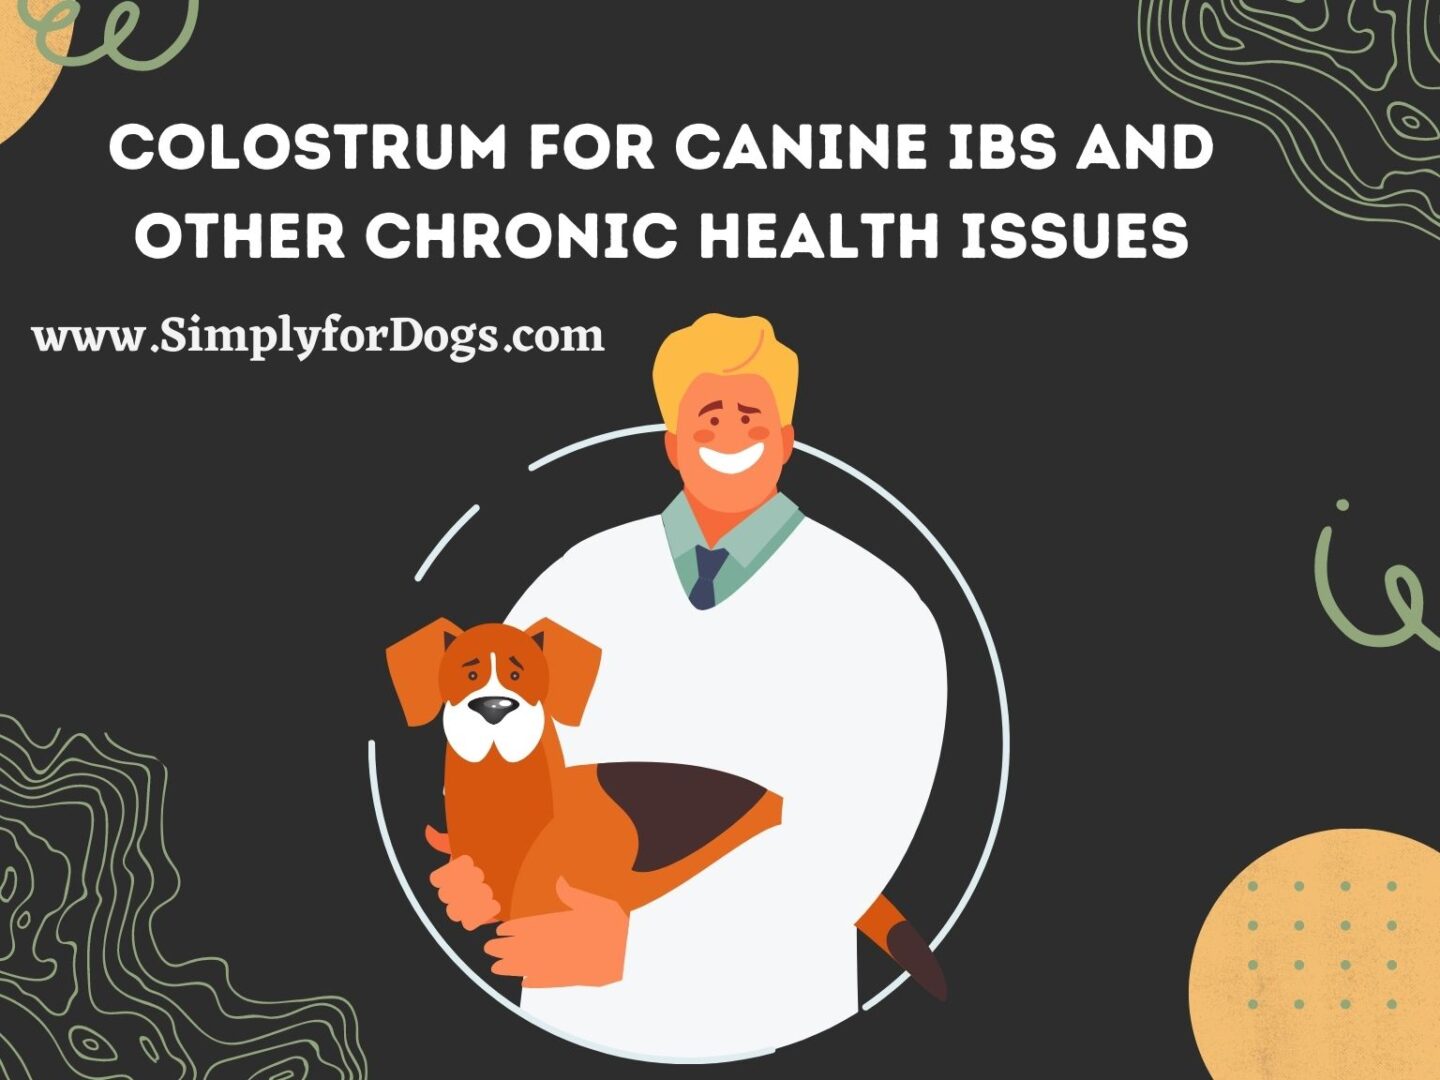 Colostrum for Canine IBS and Other Chronic Health Issues